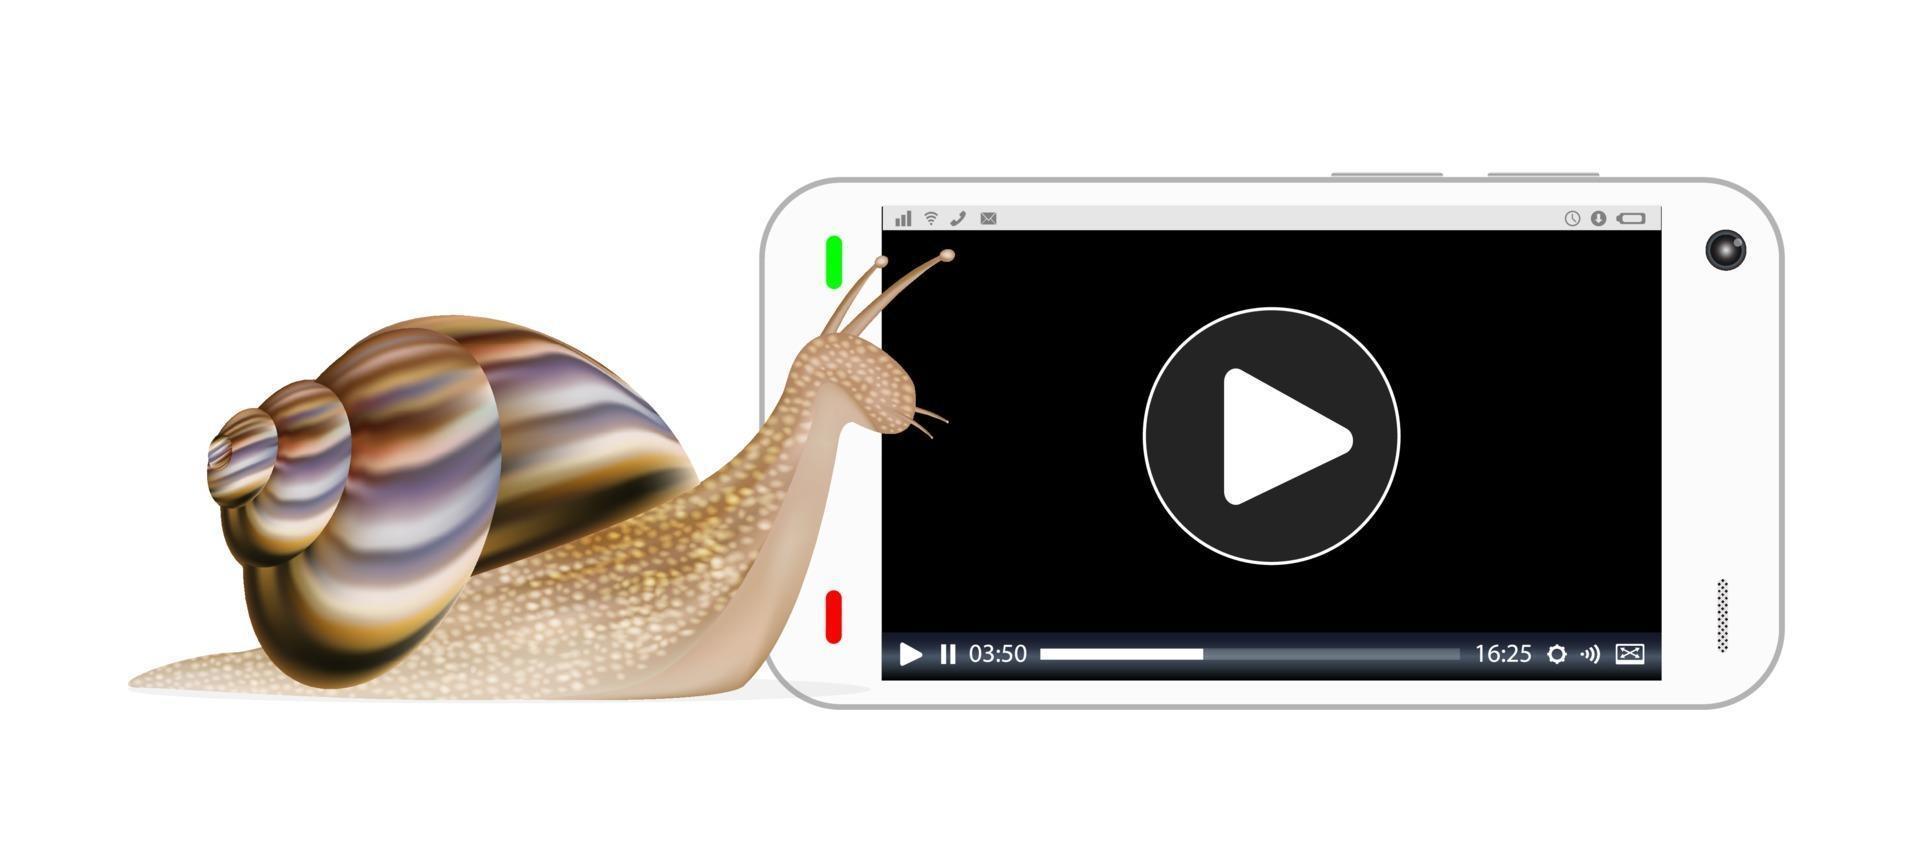 snail and smartphone with media player screen vector